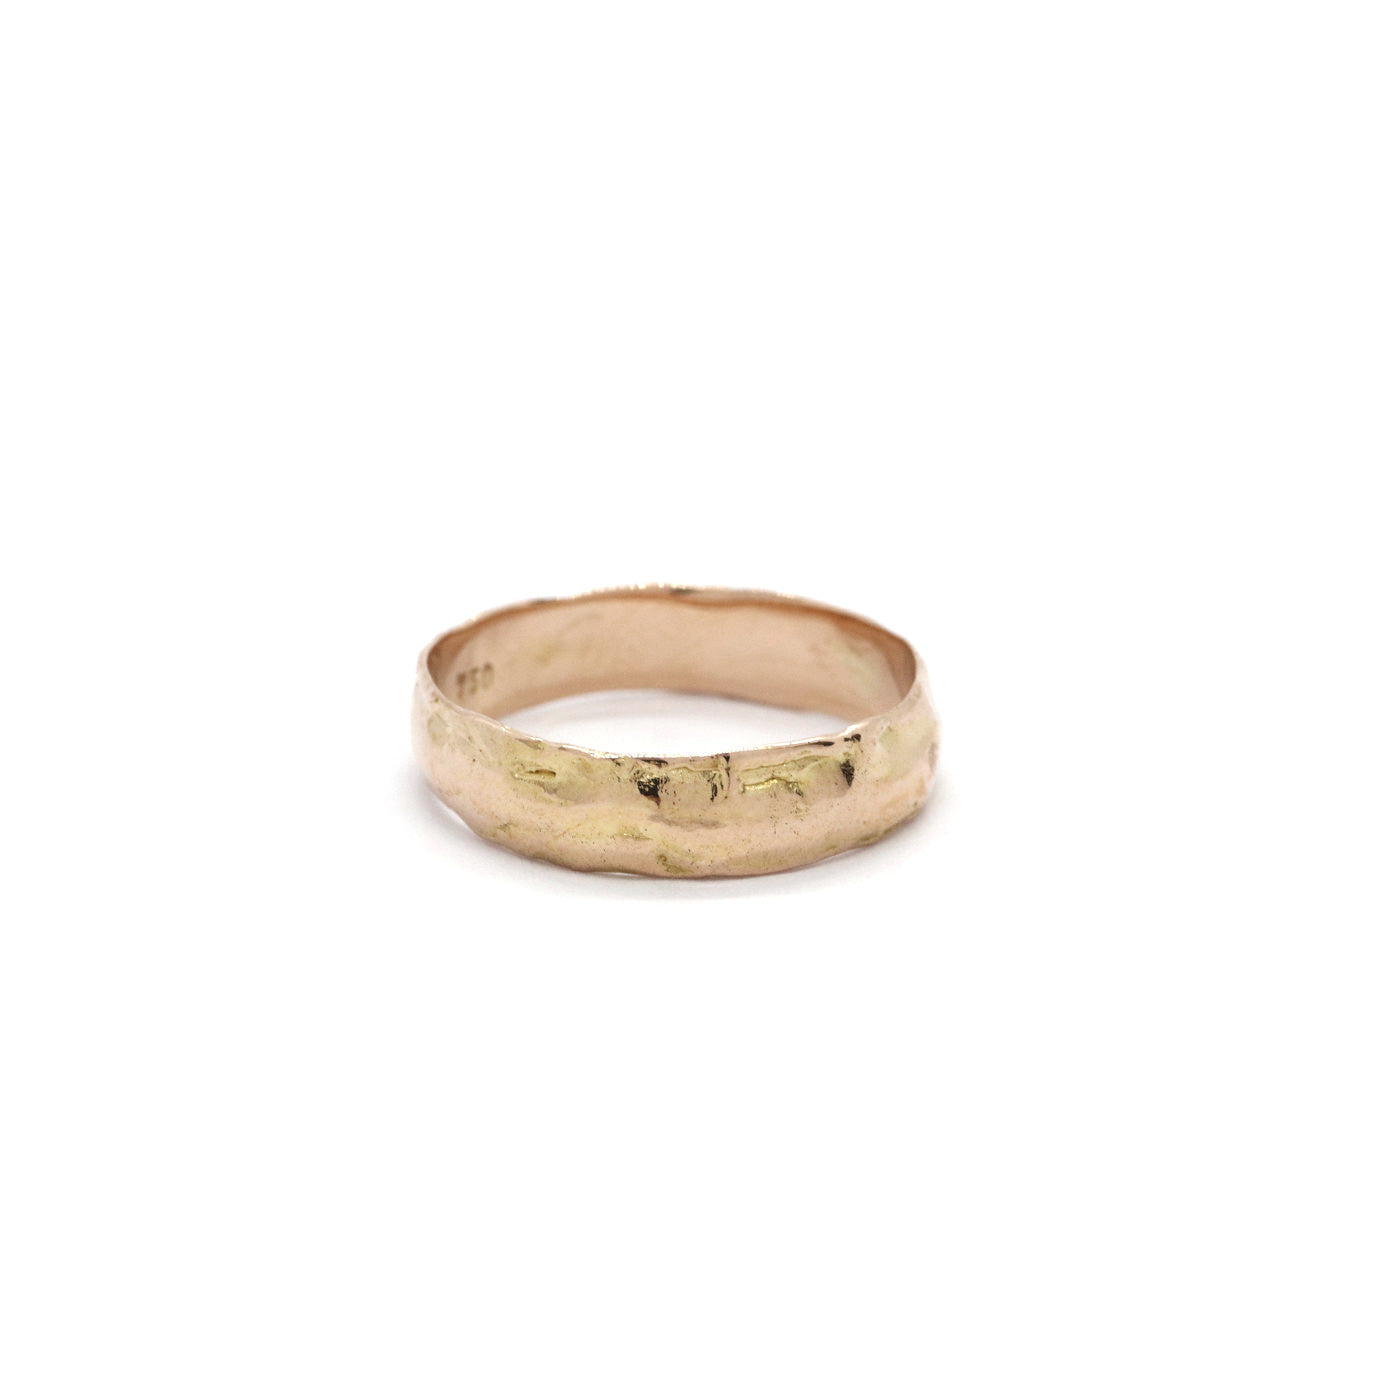 Ring VerveX Wedding Band for Him 14ct or 18ct rose gold product view innan jewellery independent atelier berlin